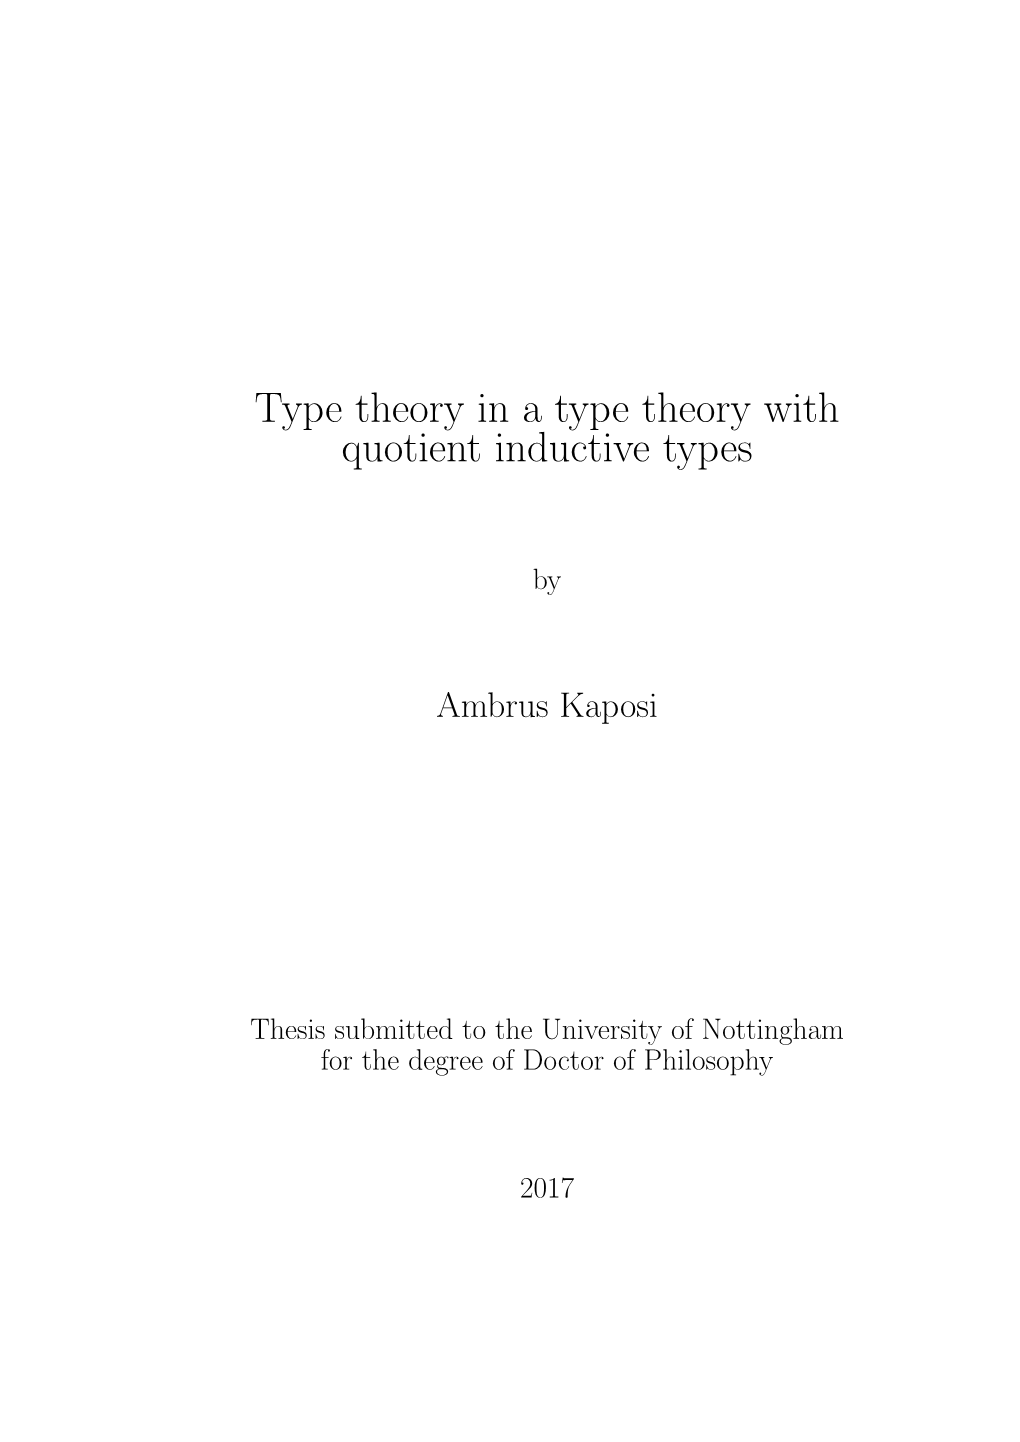 Type Theory in a Type Theory with Quotient Inductive Types